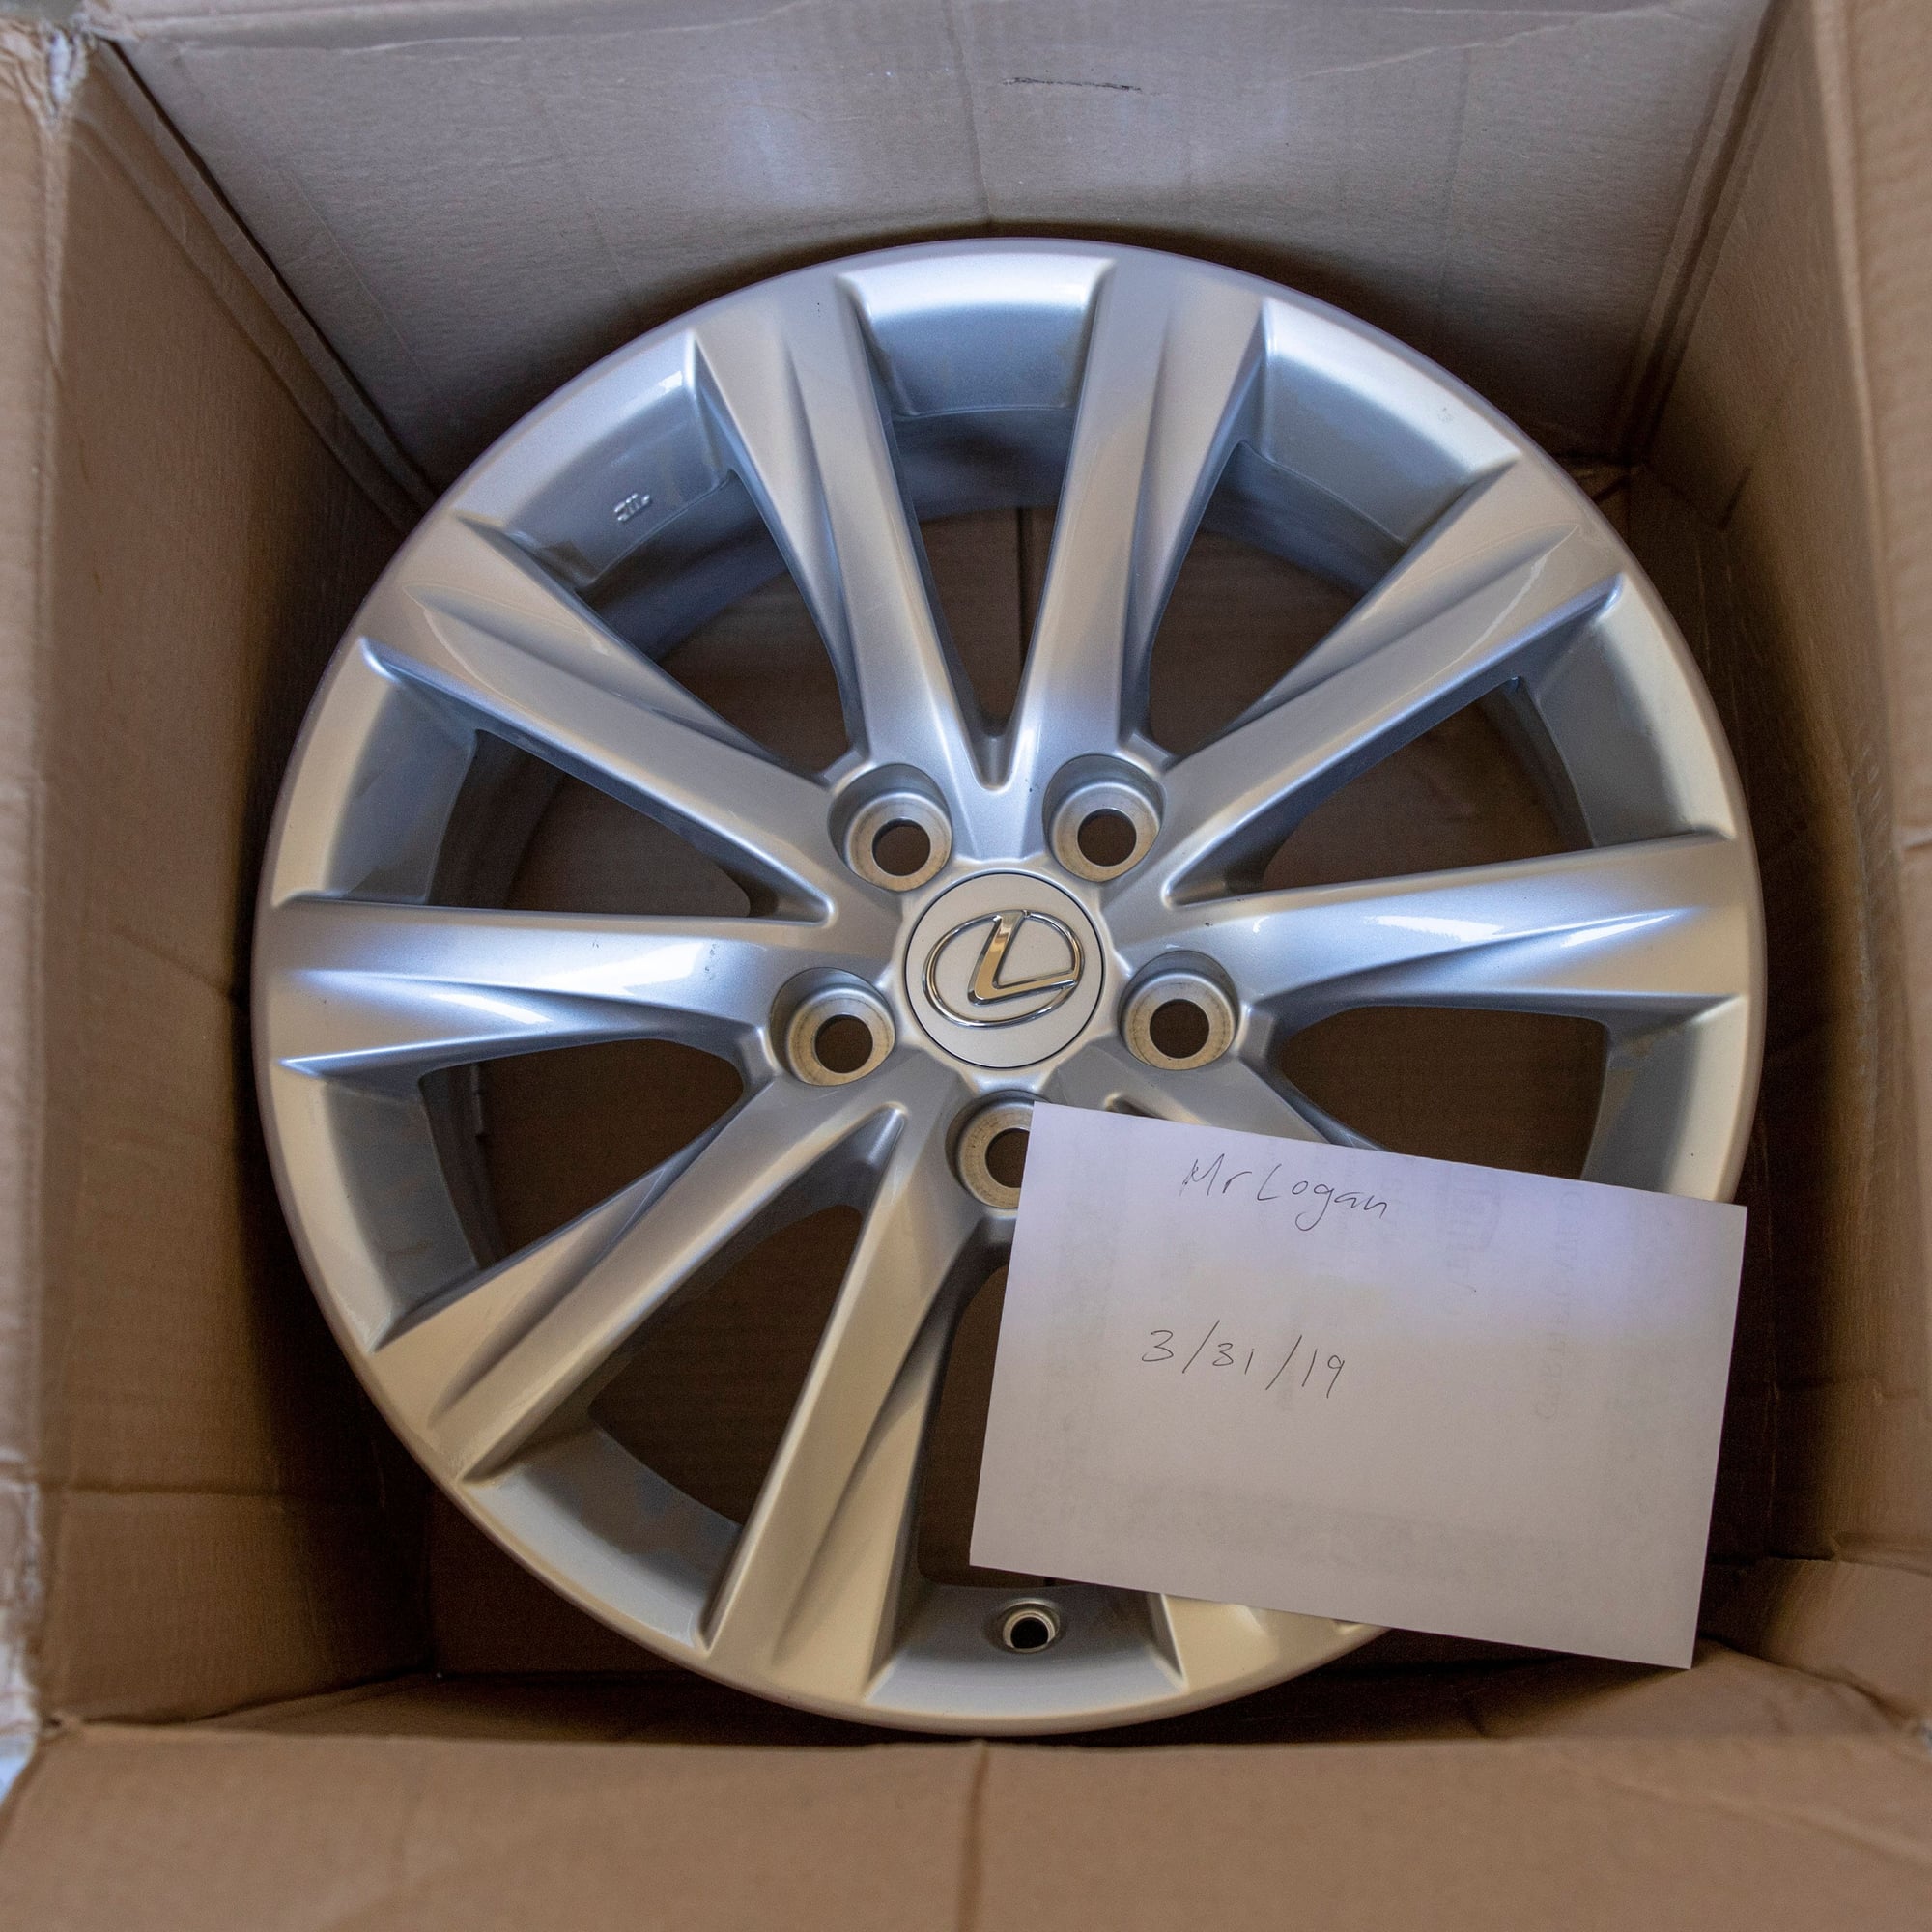 Wheels and Tires/Axles - 2015 3rd Generation Lexus IS 250 OEM 17" Wheels - Used - 2013 to 2019 Lexus IS250 - Sacramento, CA 95823, United States